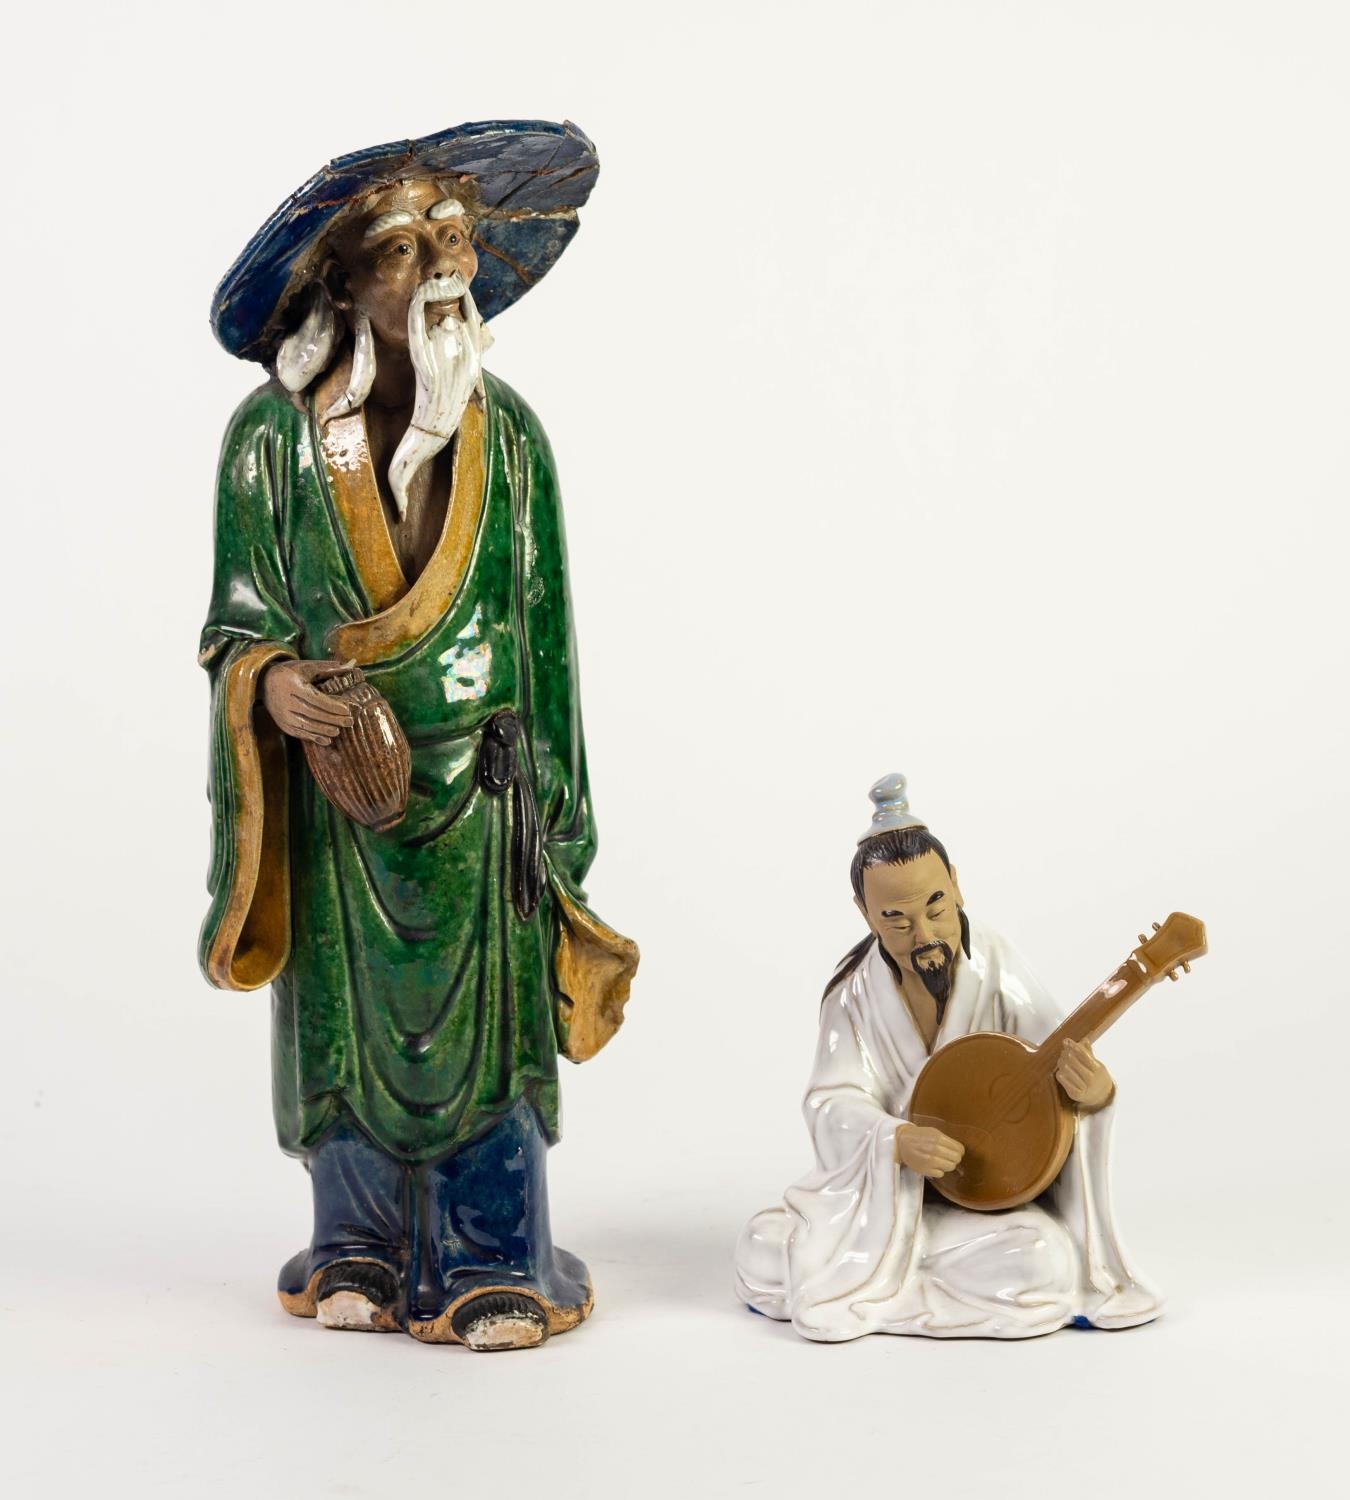 TWO ORIENTAL PART GLAZED PORCELAIN FIGURES, one modelled as an elderly man with brimmed hat,